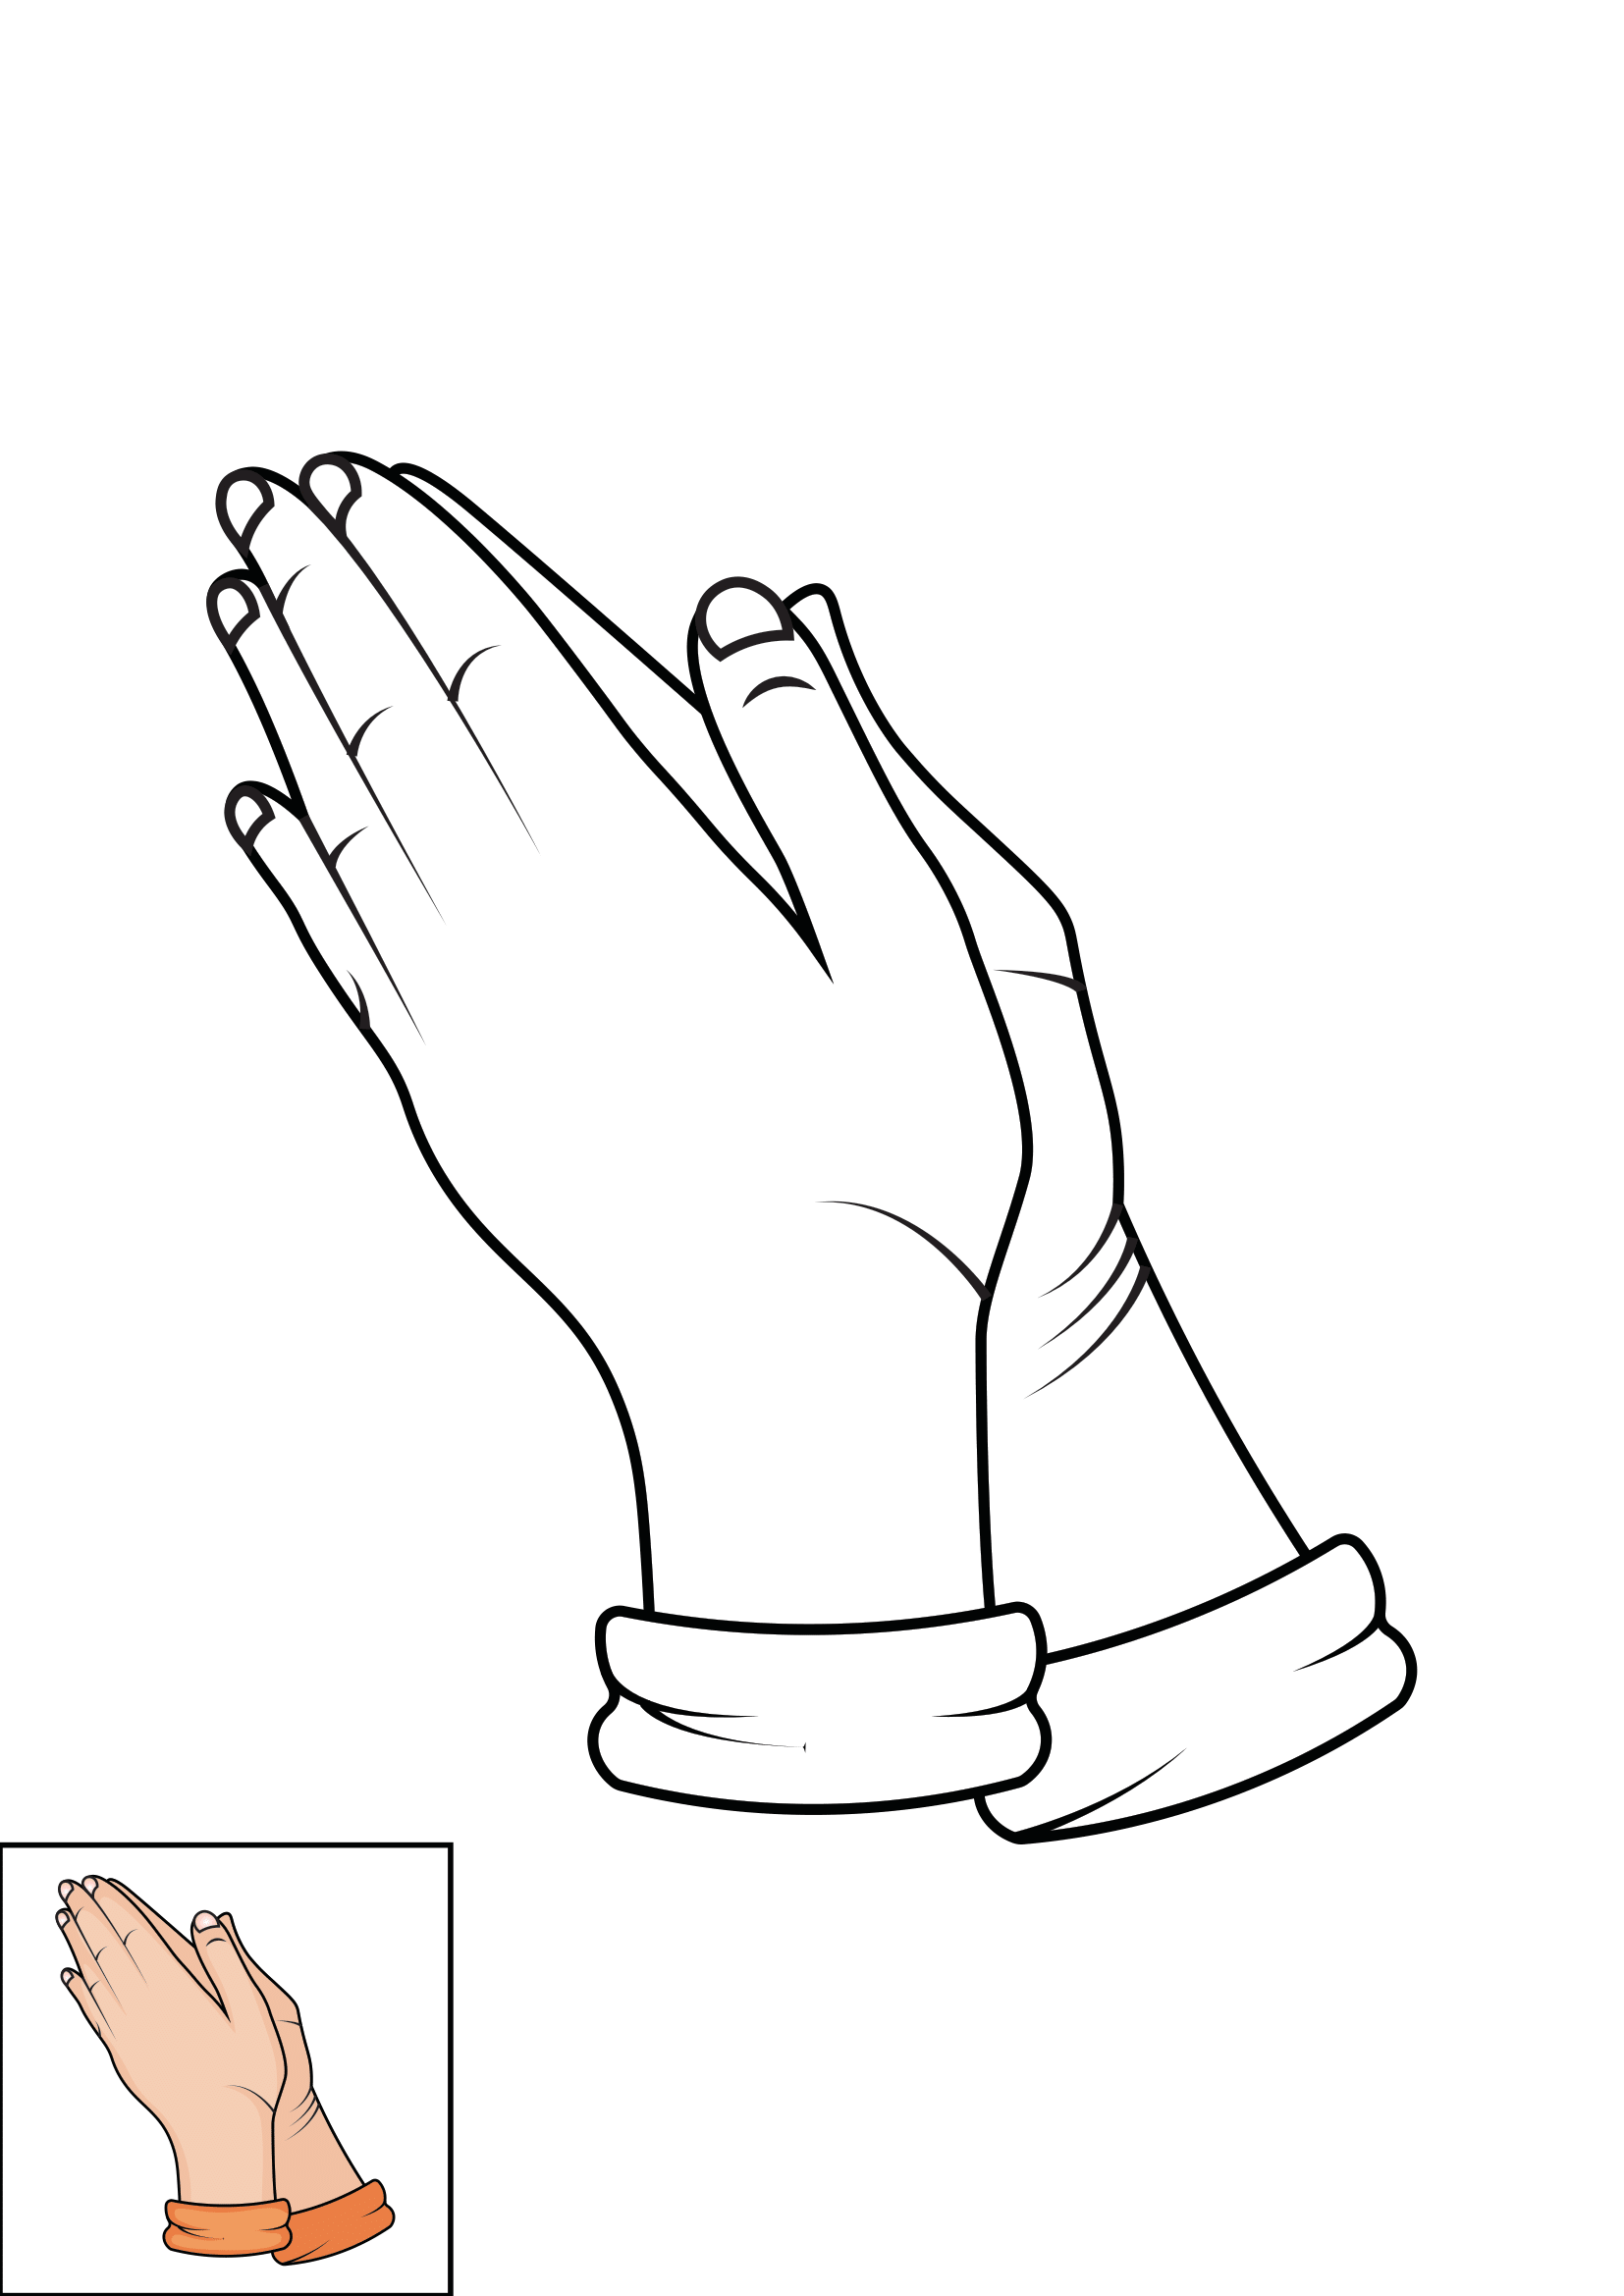 How to Draw Praying Hands Step by Step Printable Color